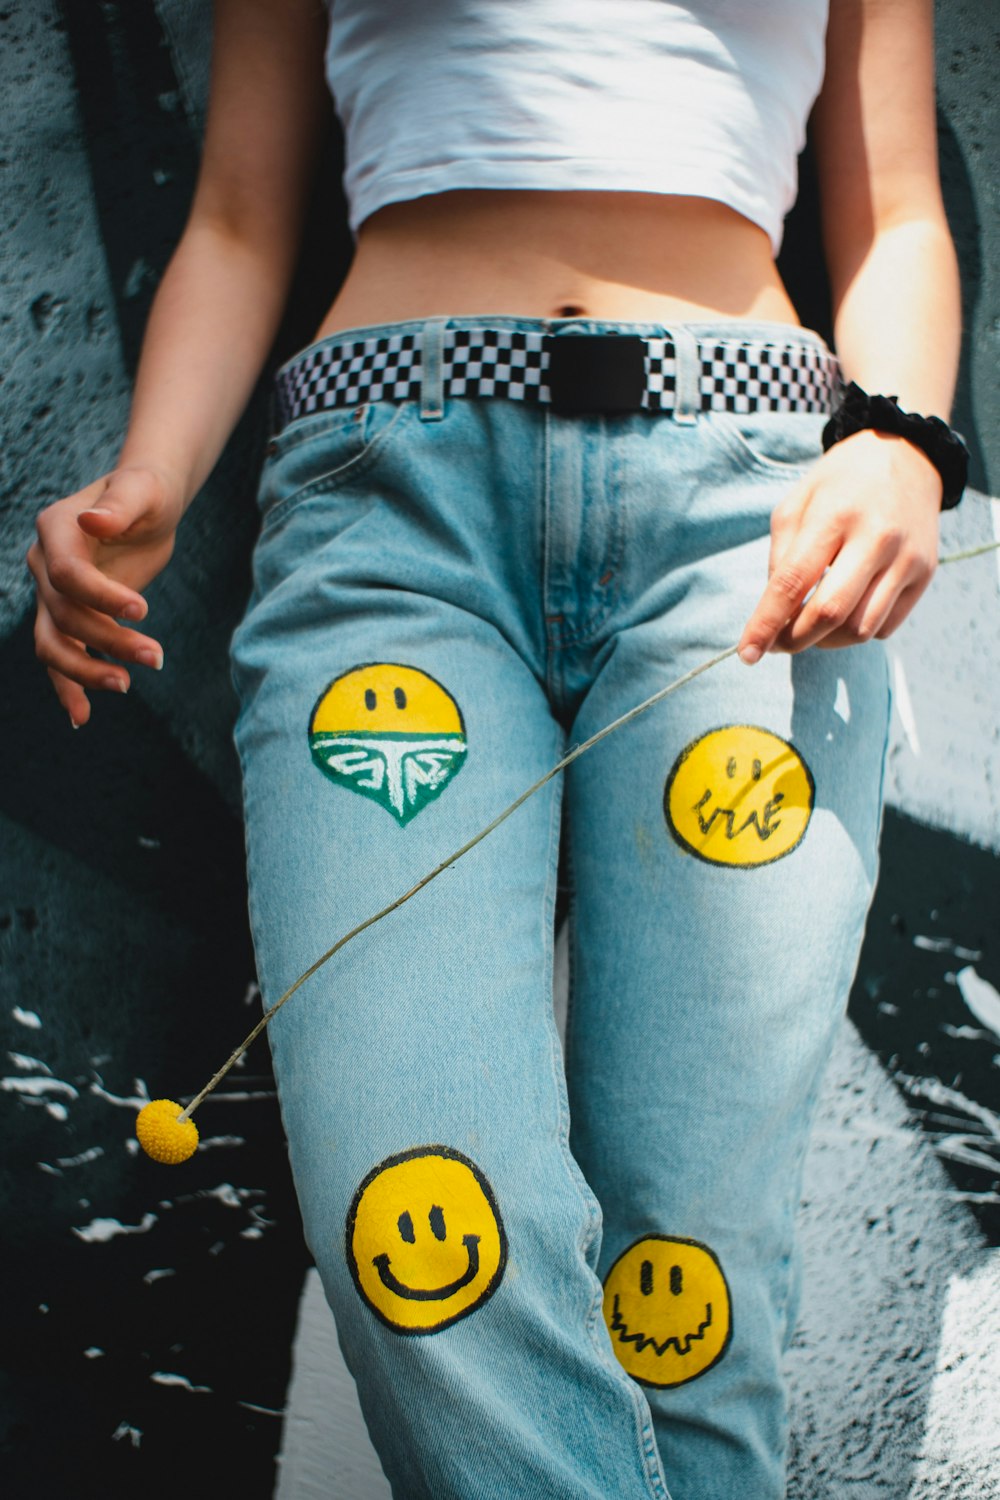 a woman wearing jeans with smiley faces painted on them